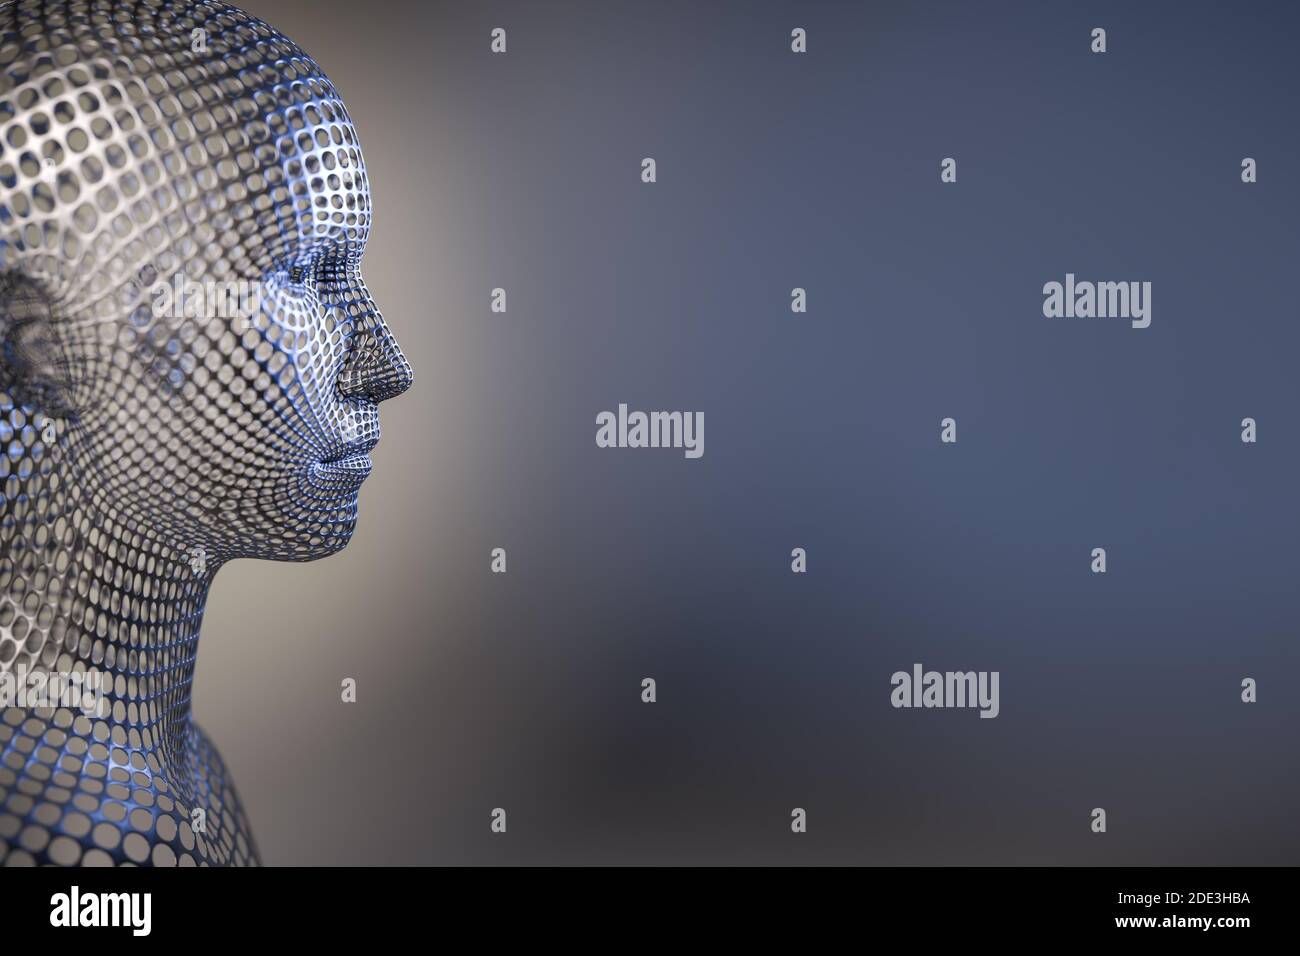 Digitized Model of a female human head. Science fiction robot concept - cyborg, artificial intelligence. Stock Photo